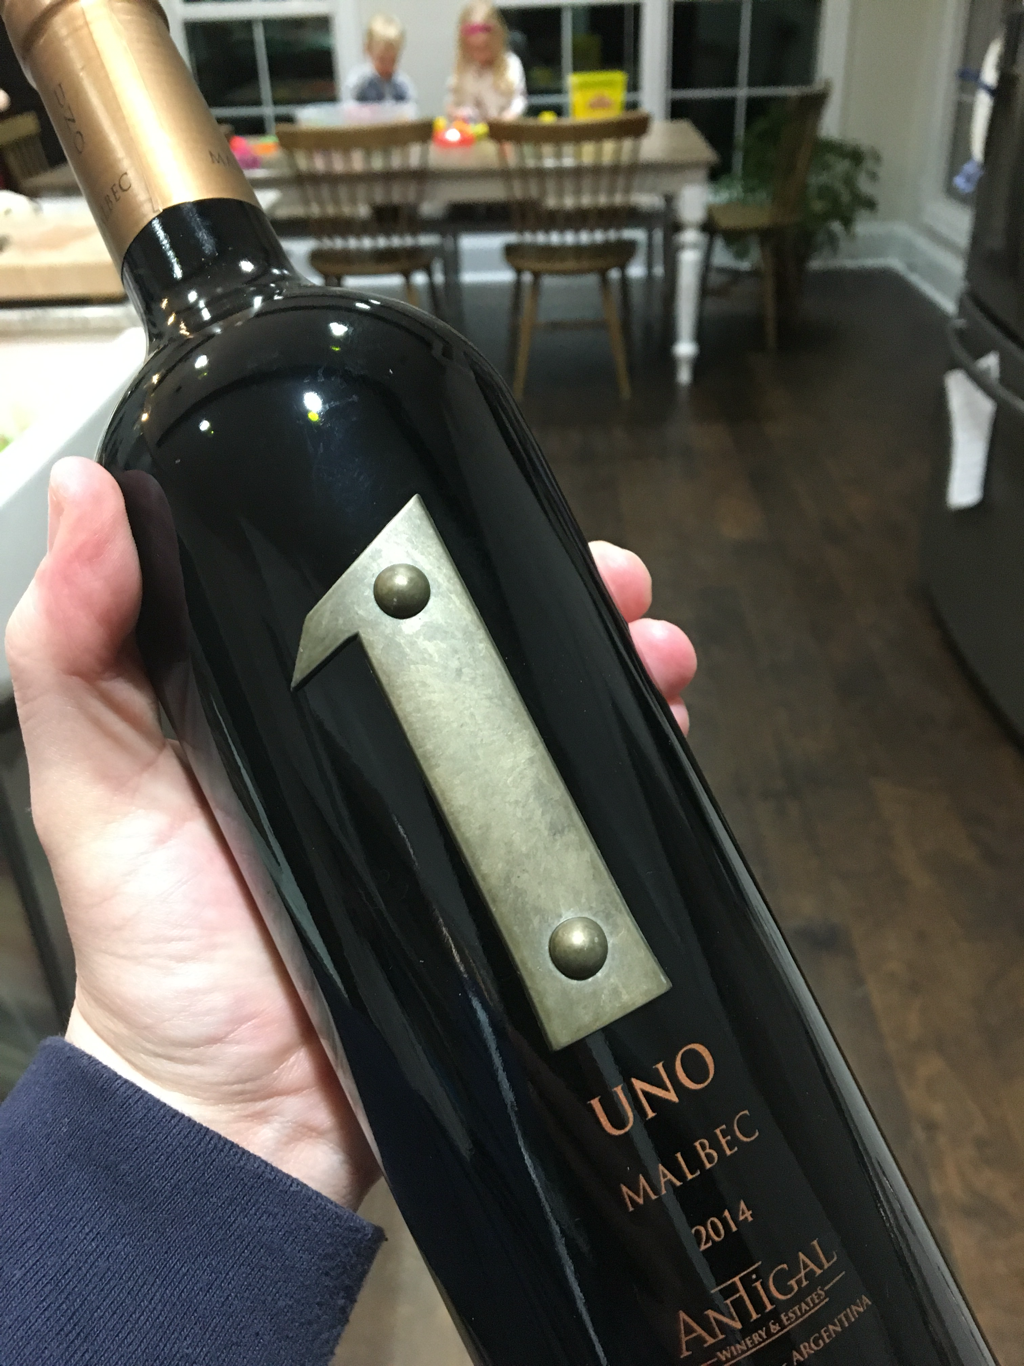 Picture of a bottle of wine with “Uno” on the front